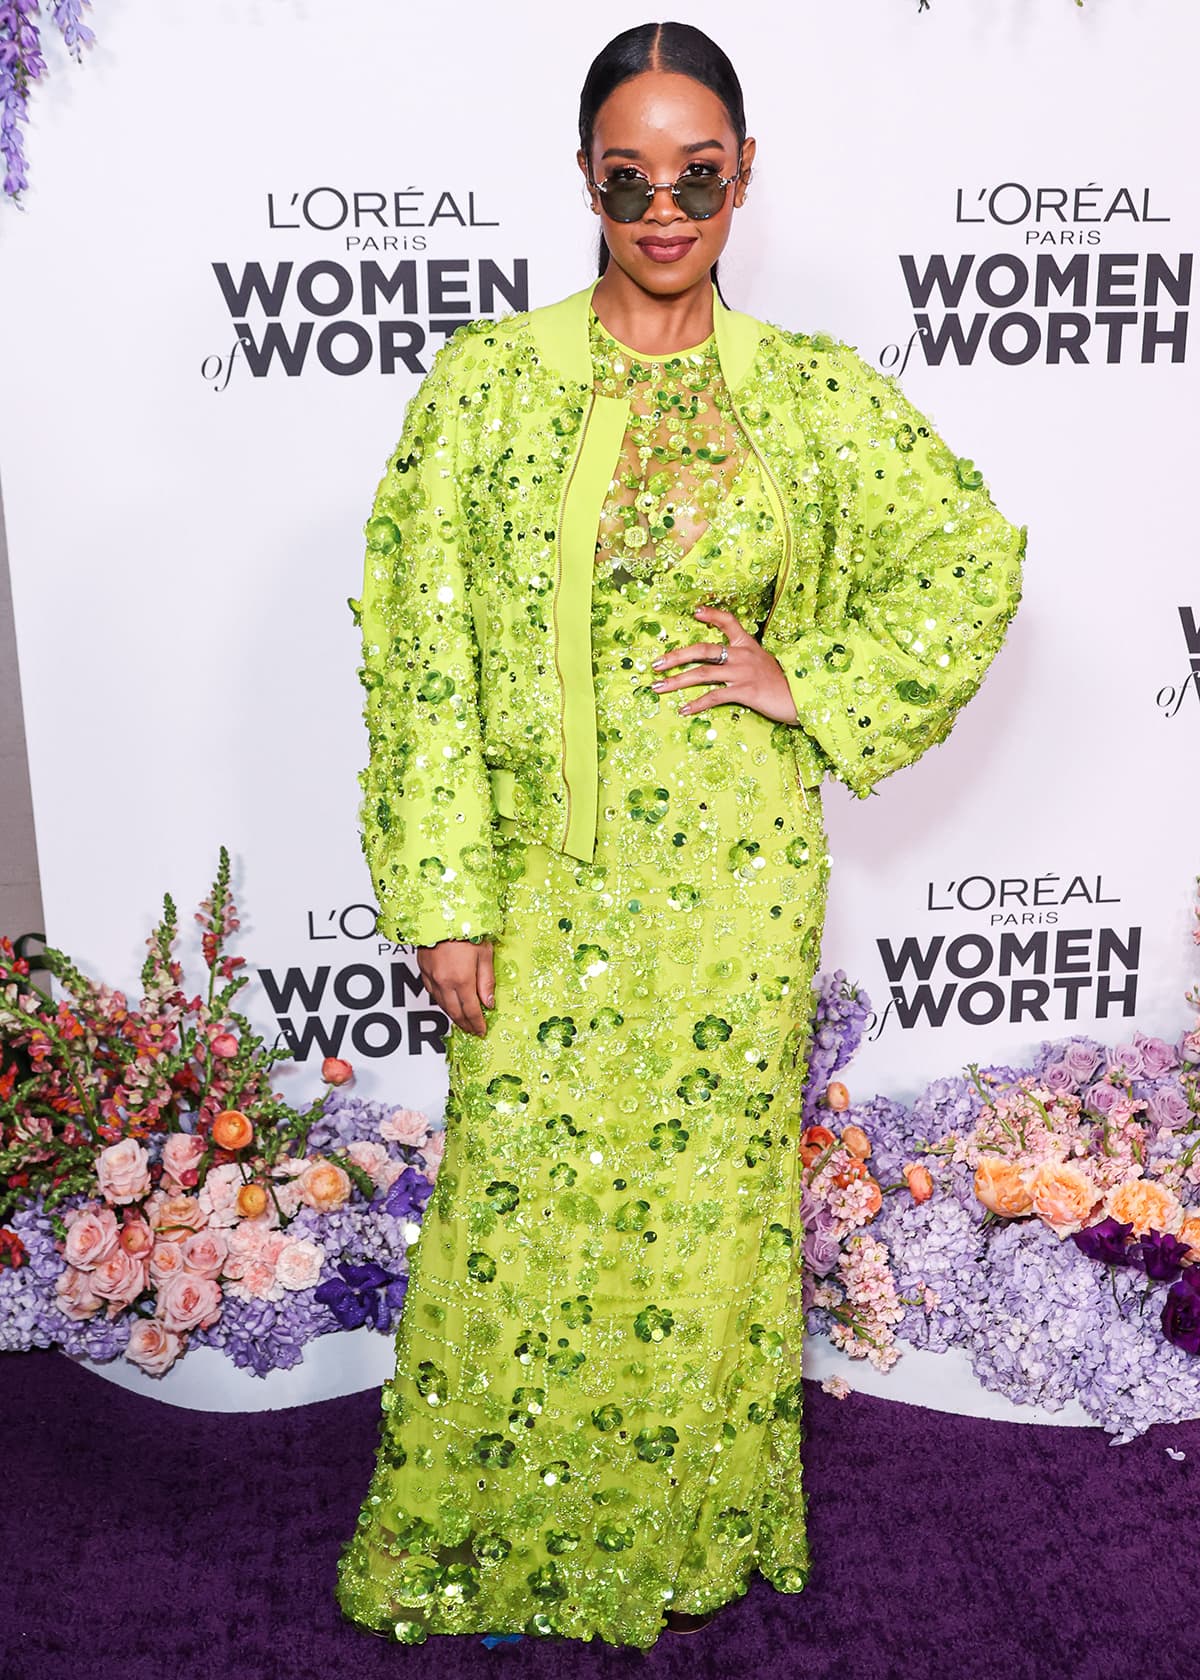 H.E.R. wears a striking lime green floral sequin-embellished gown and a matching jacket by Elie Saab